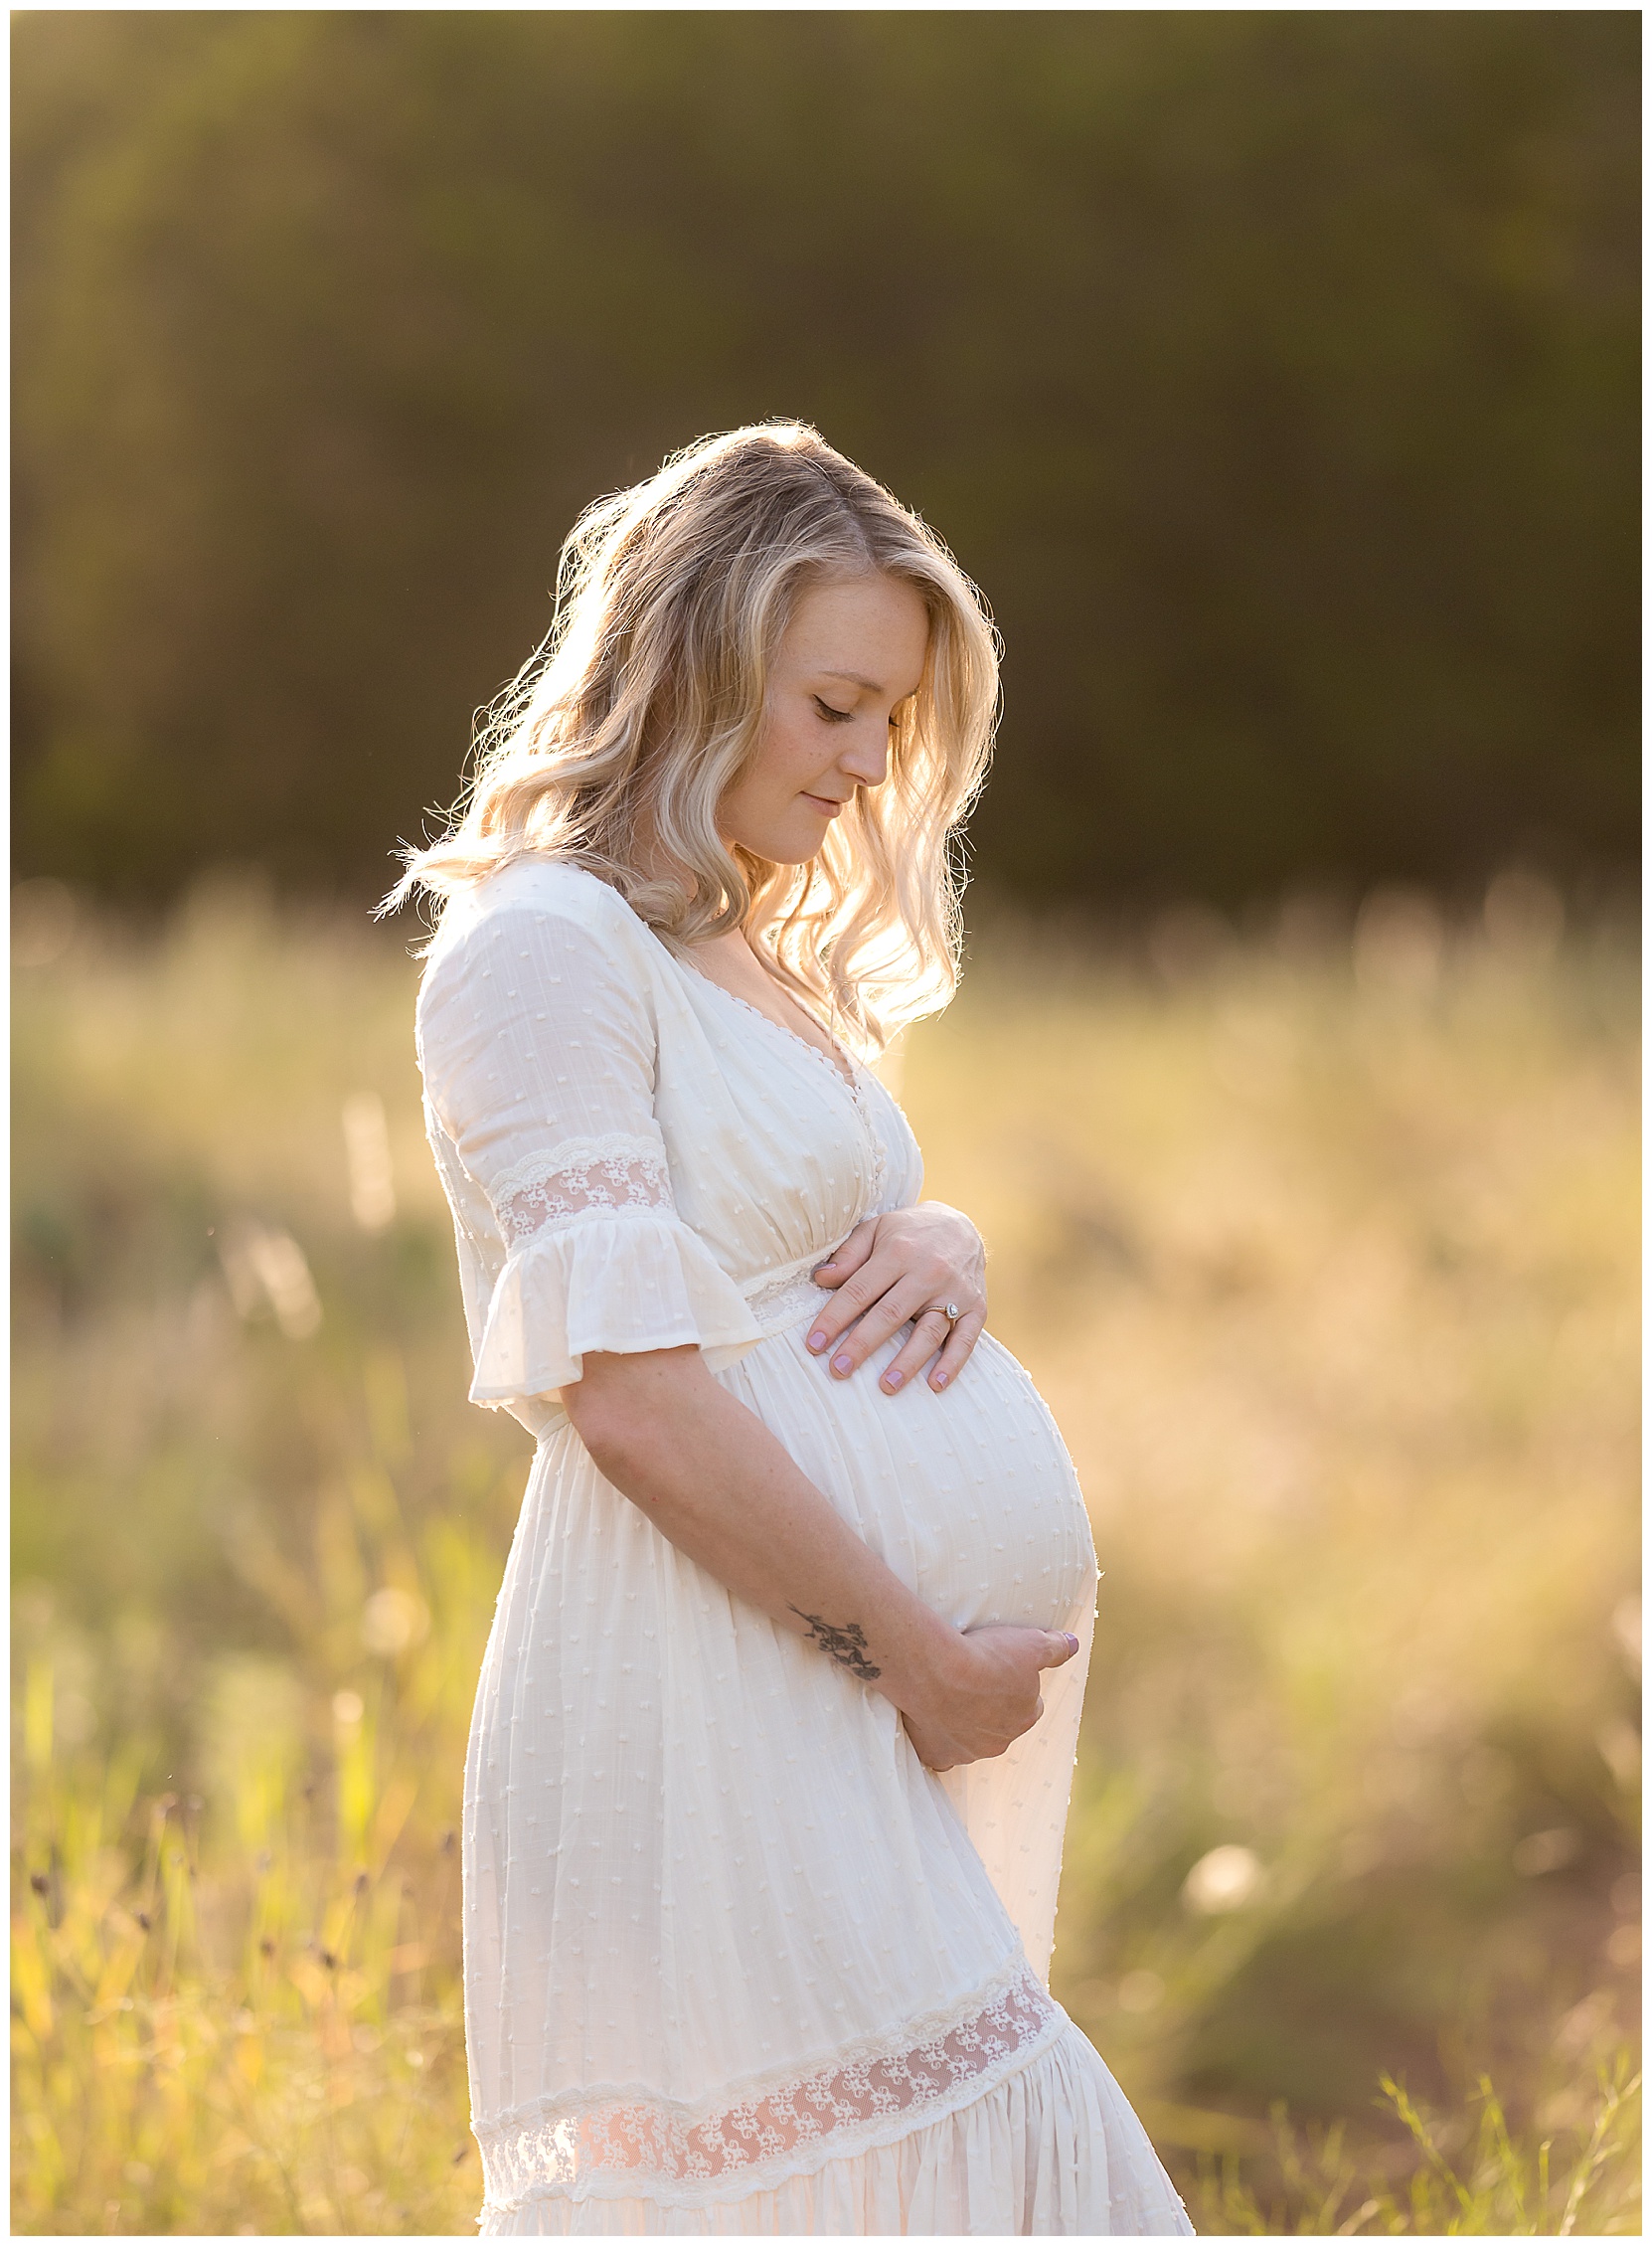 pregnant woman wearing a white dress holding her baby bump